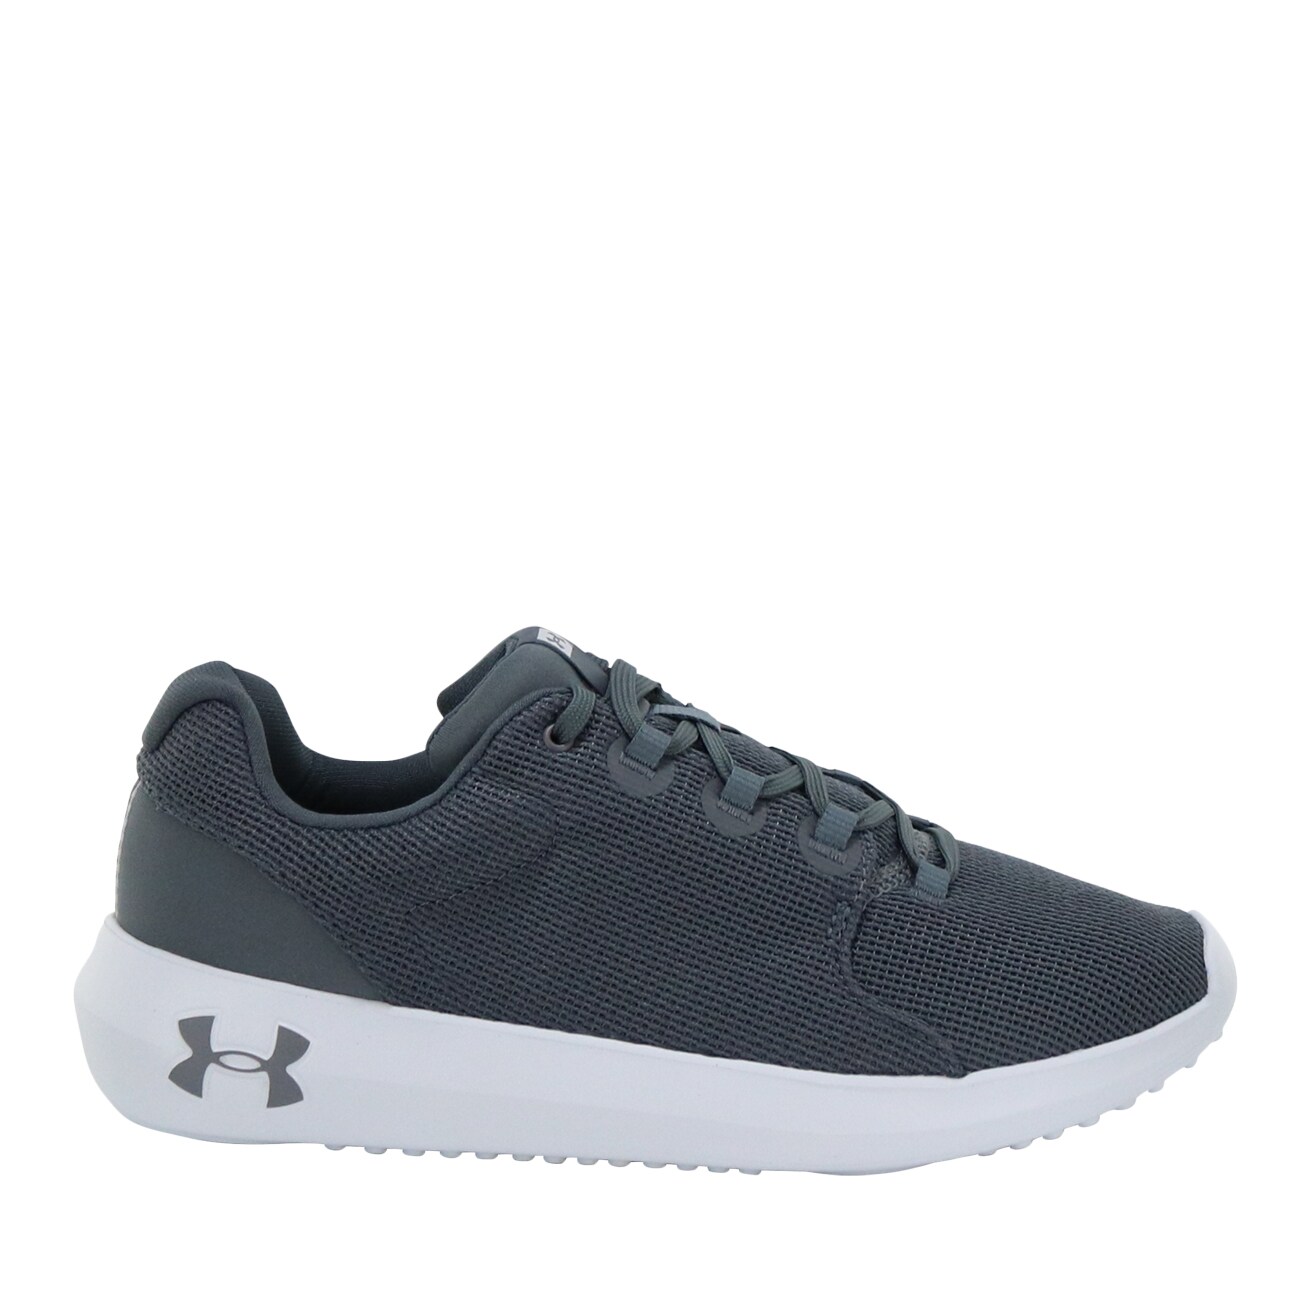 UNDER ARMOUR Ripple 2.0 Sneaker | The 